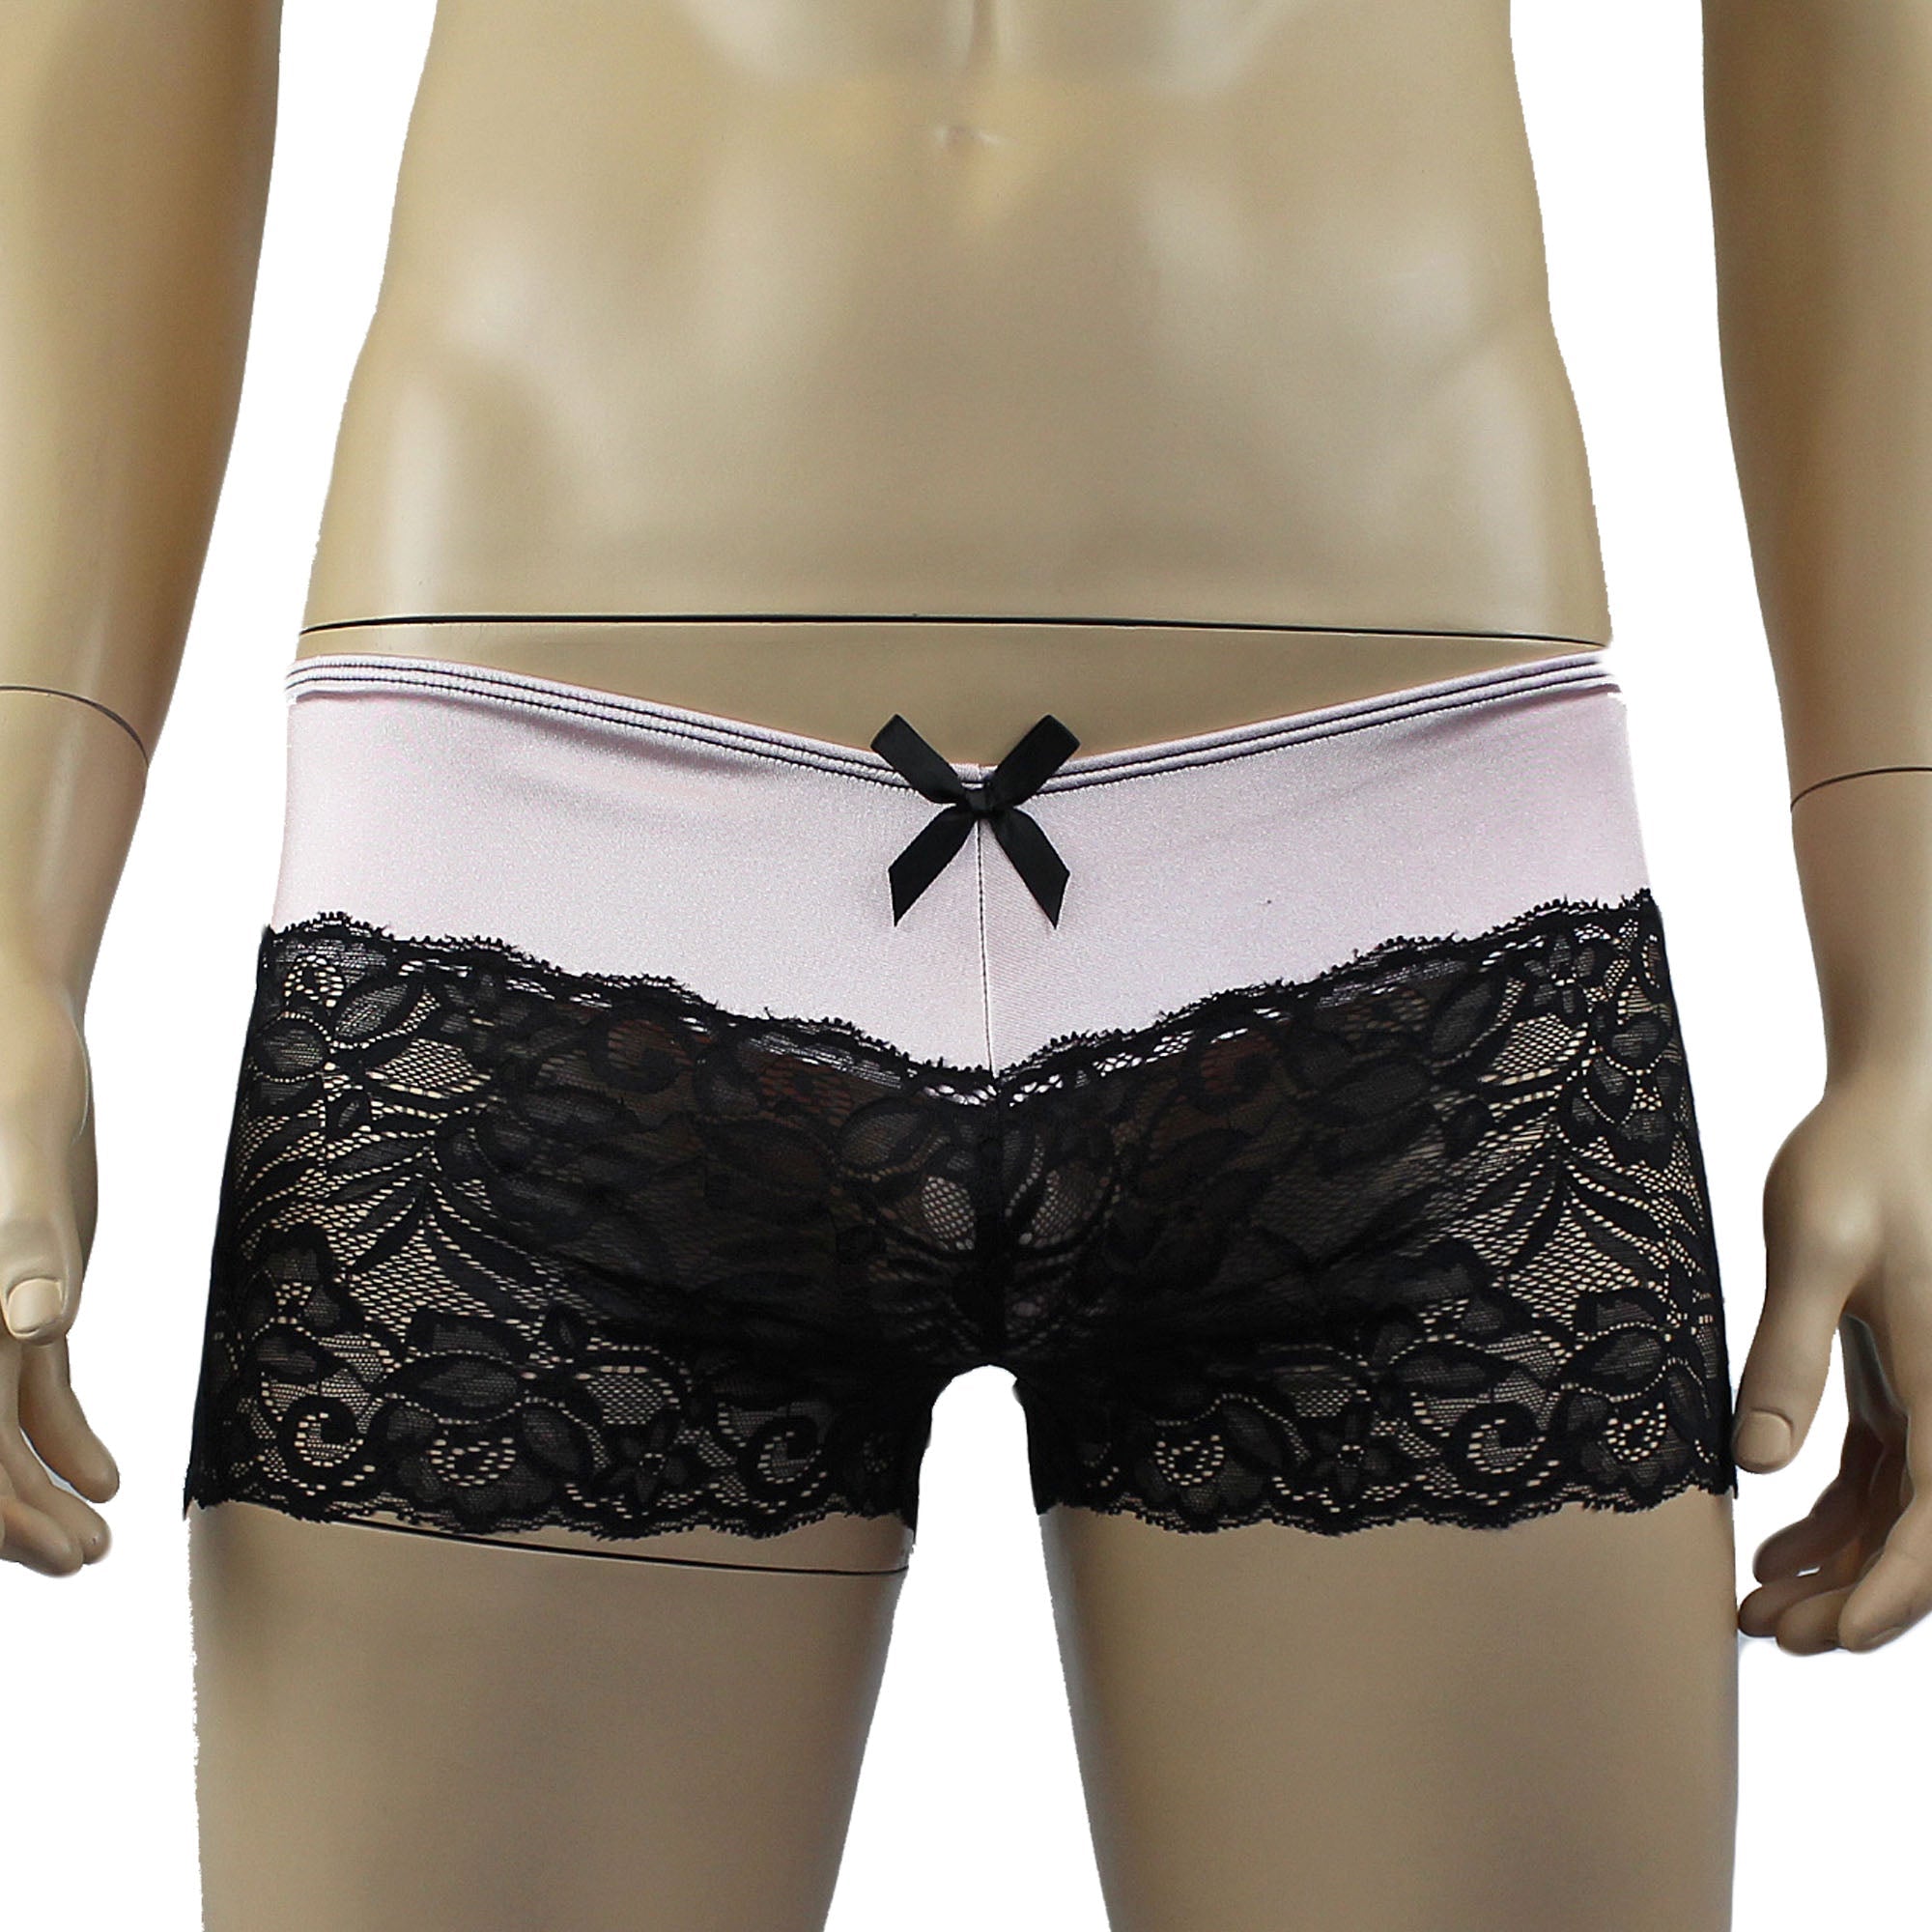 Mens Risque Boxer Briefs Light Pink and Black Lace